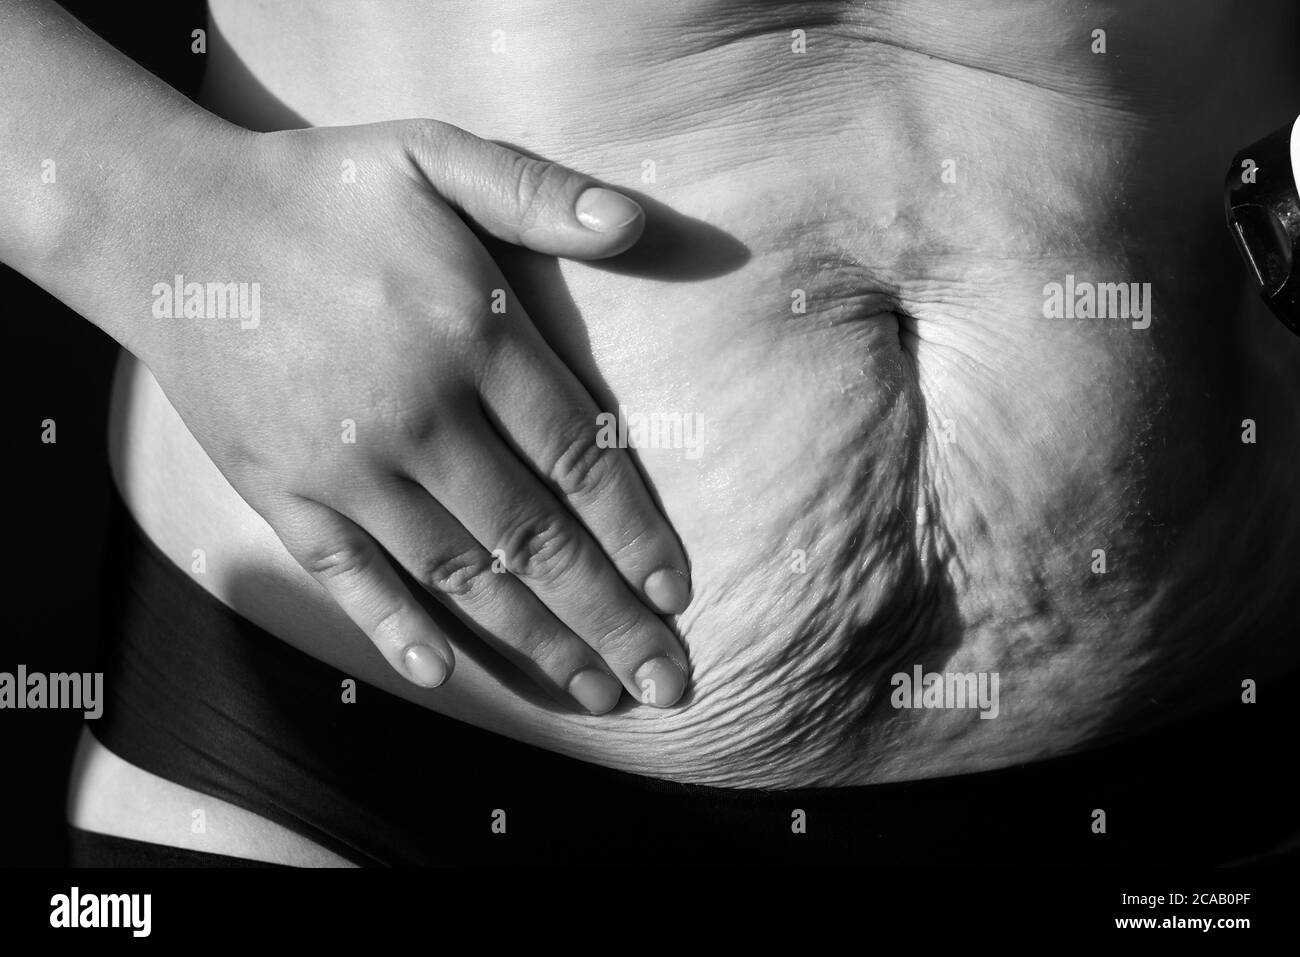 Woman smears nutritious cream sagging flabby belly with stretch marks, close-up, black and white photo. Stock Photo